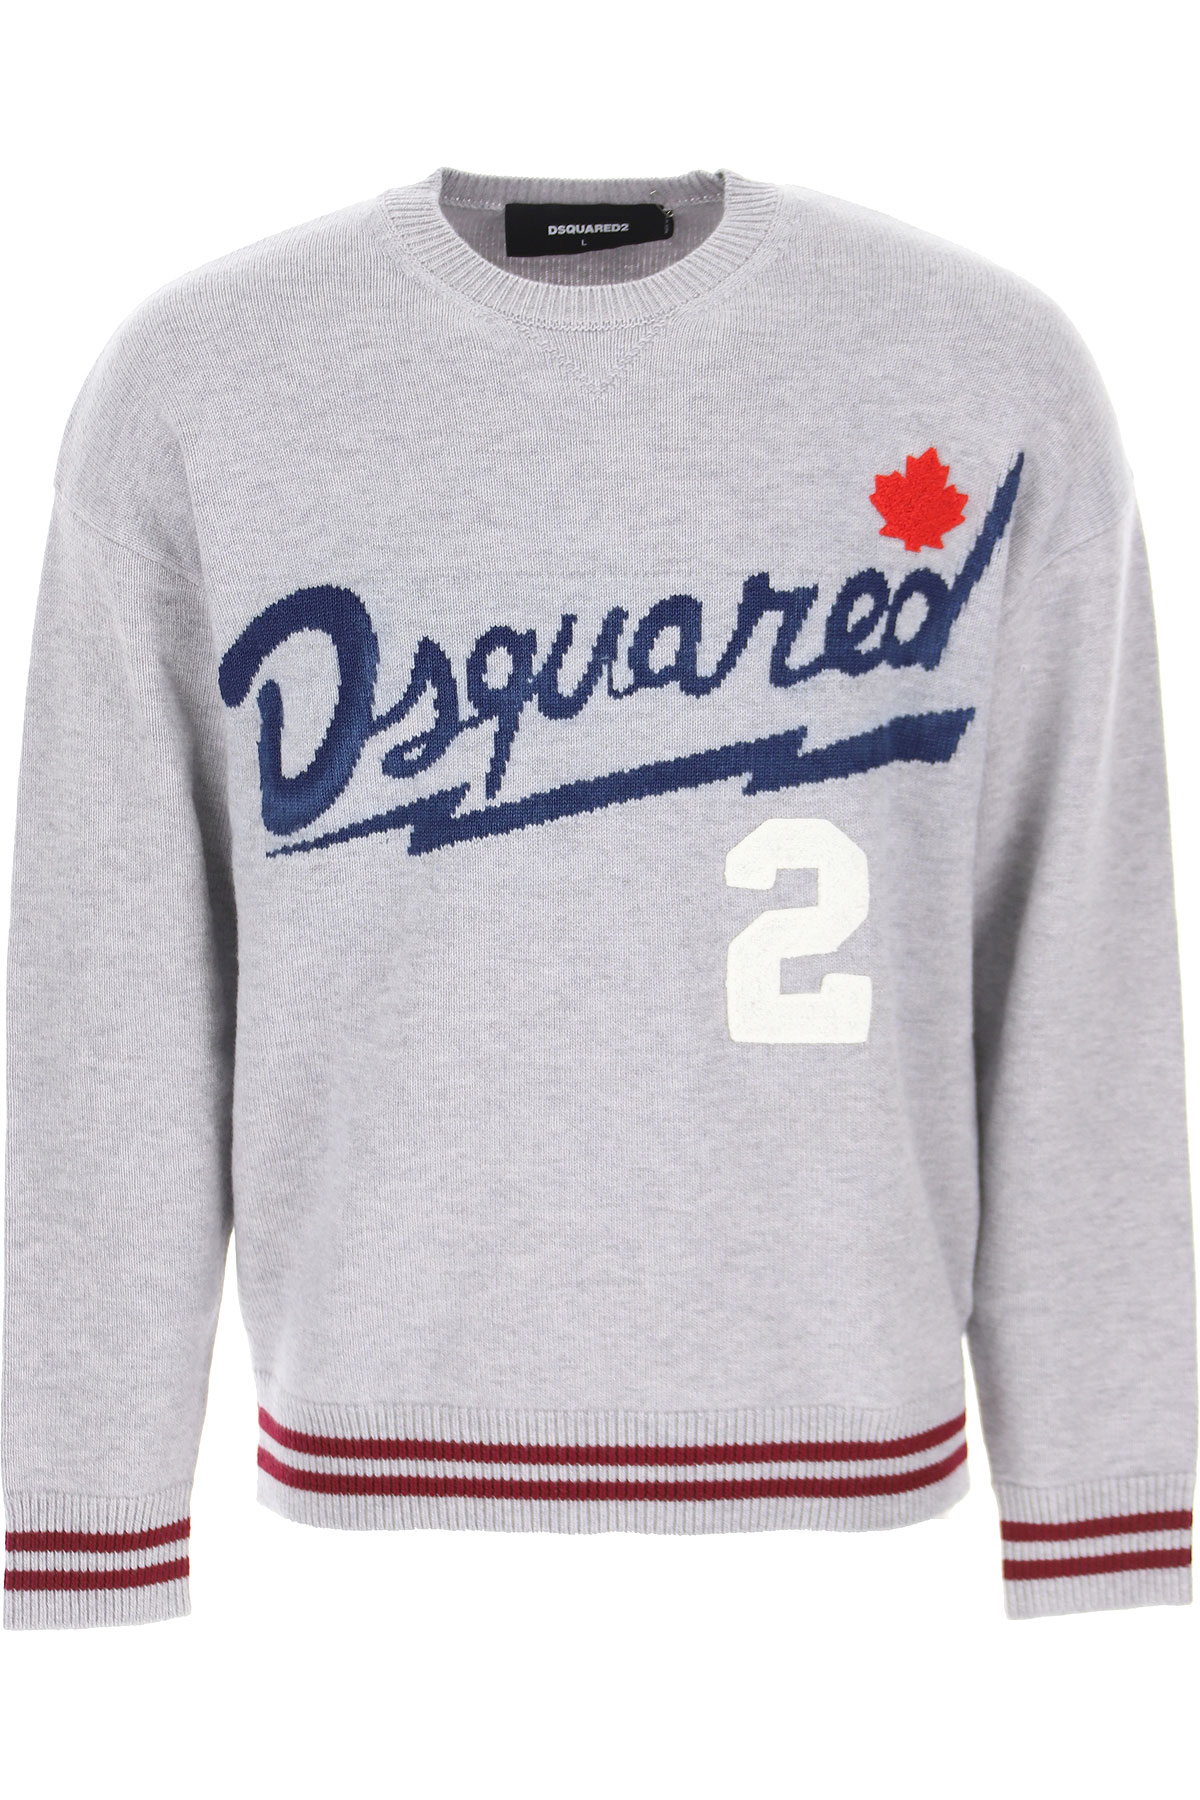 Mens Clothing Dsquared2, Style code: ha1085-s17388-961